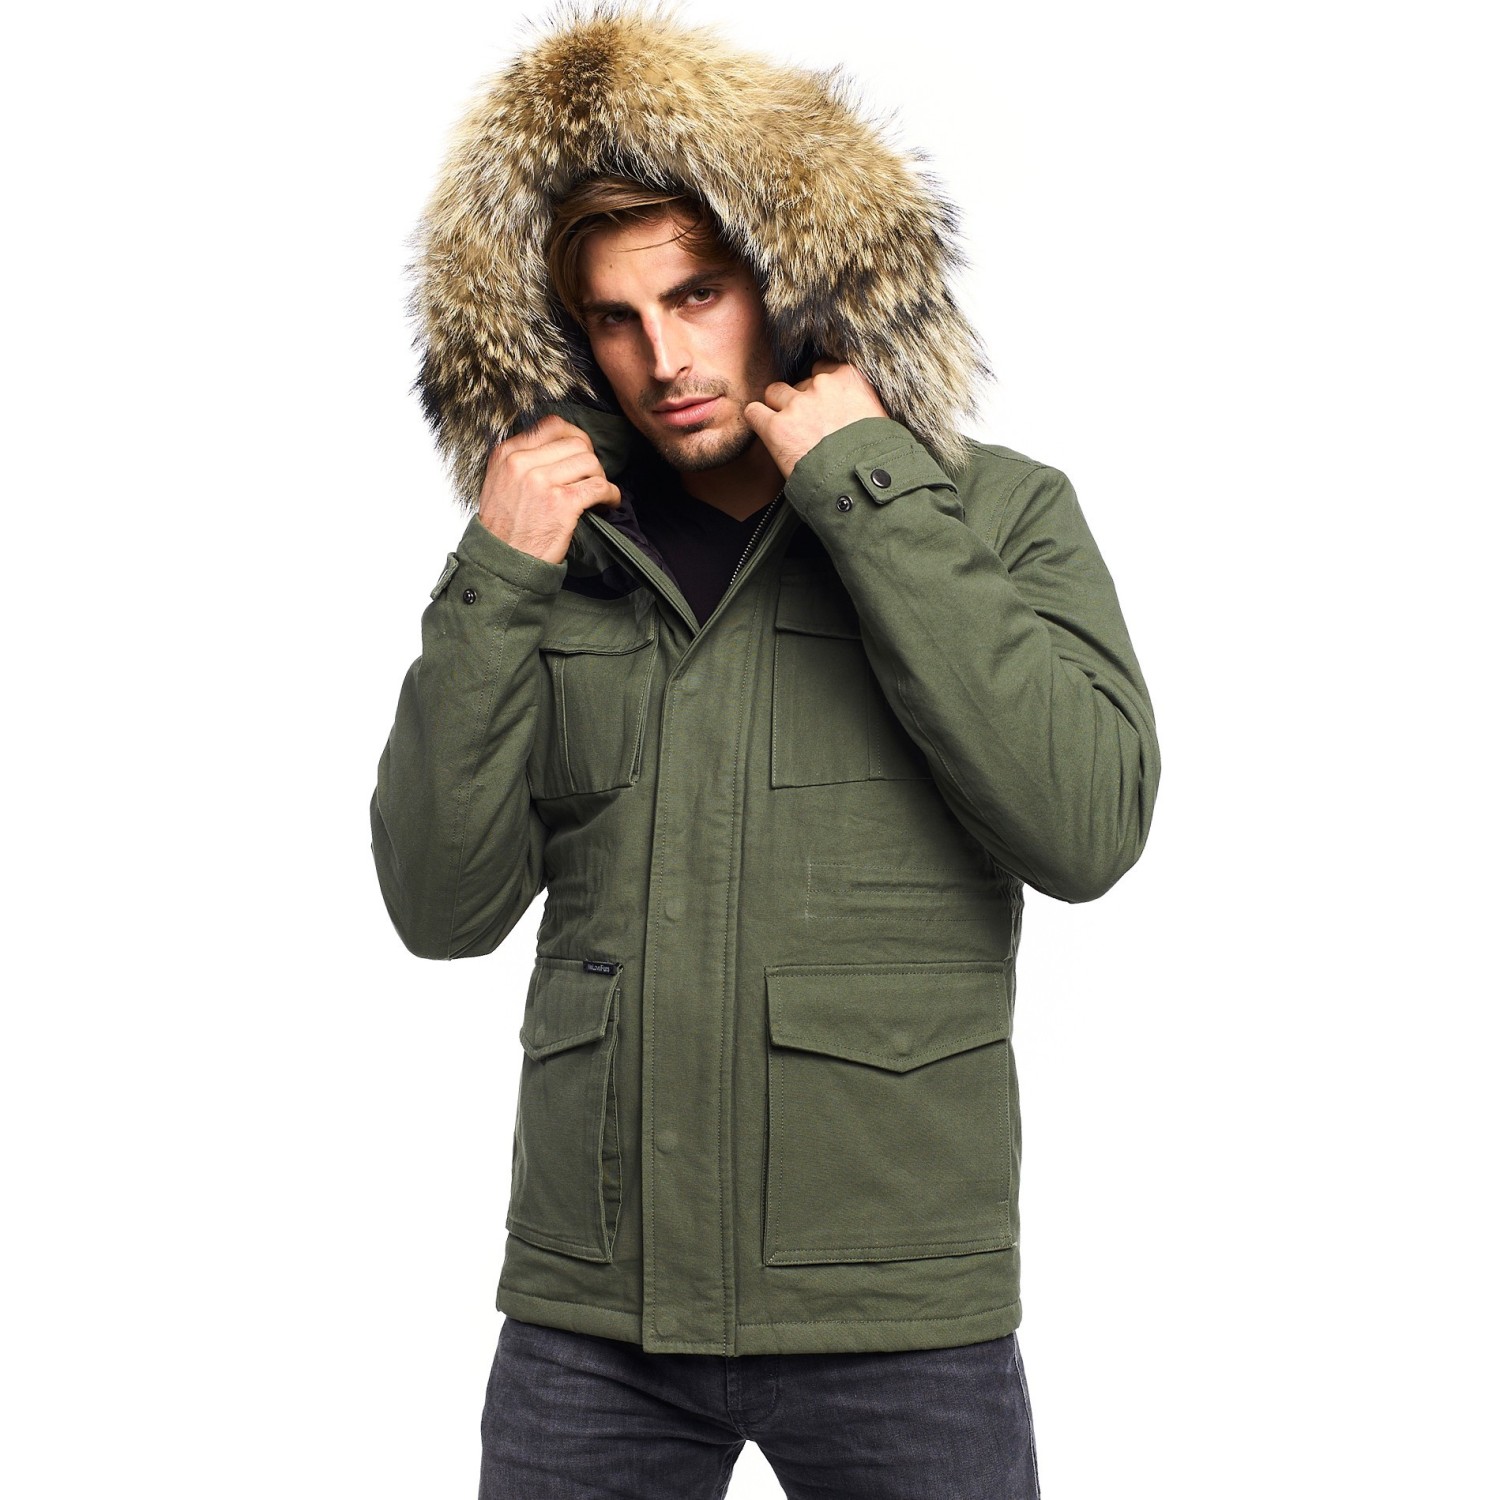 Men’s Army Jacket with fur